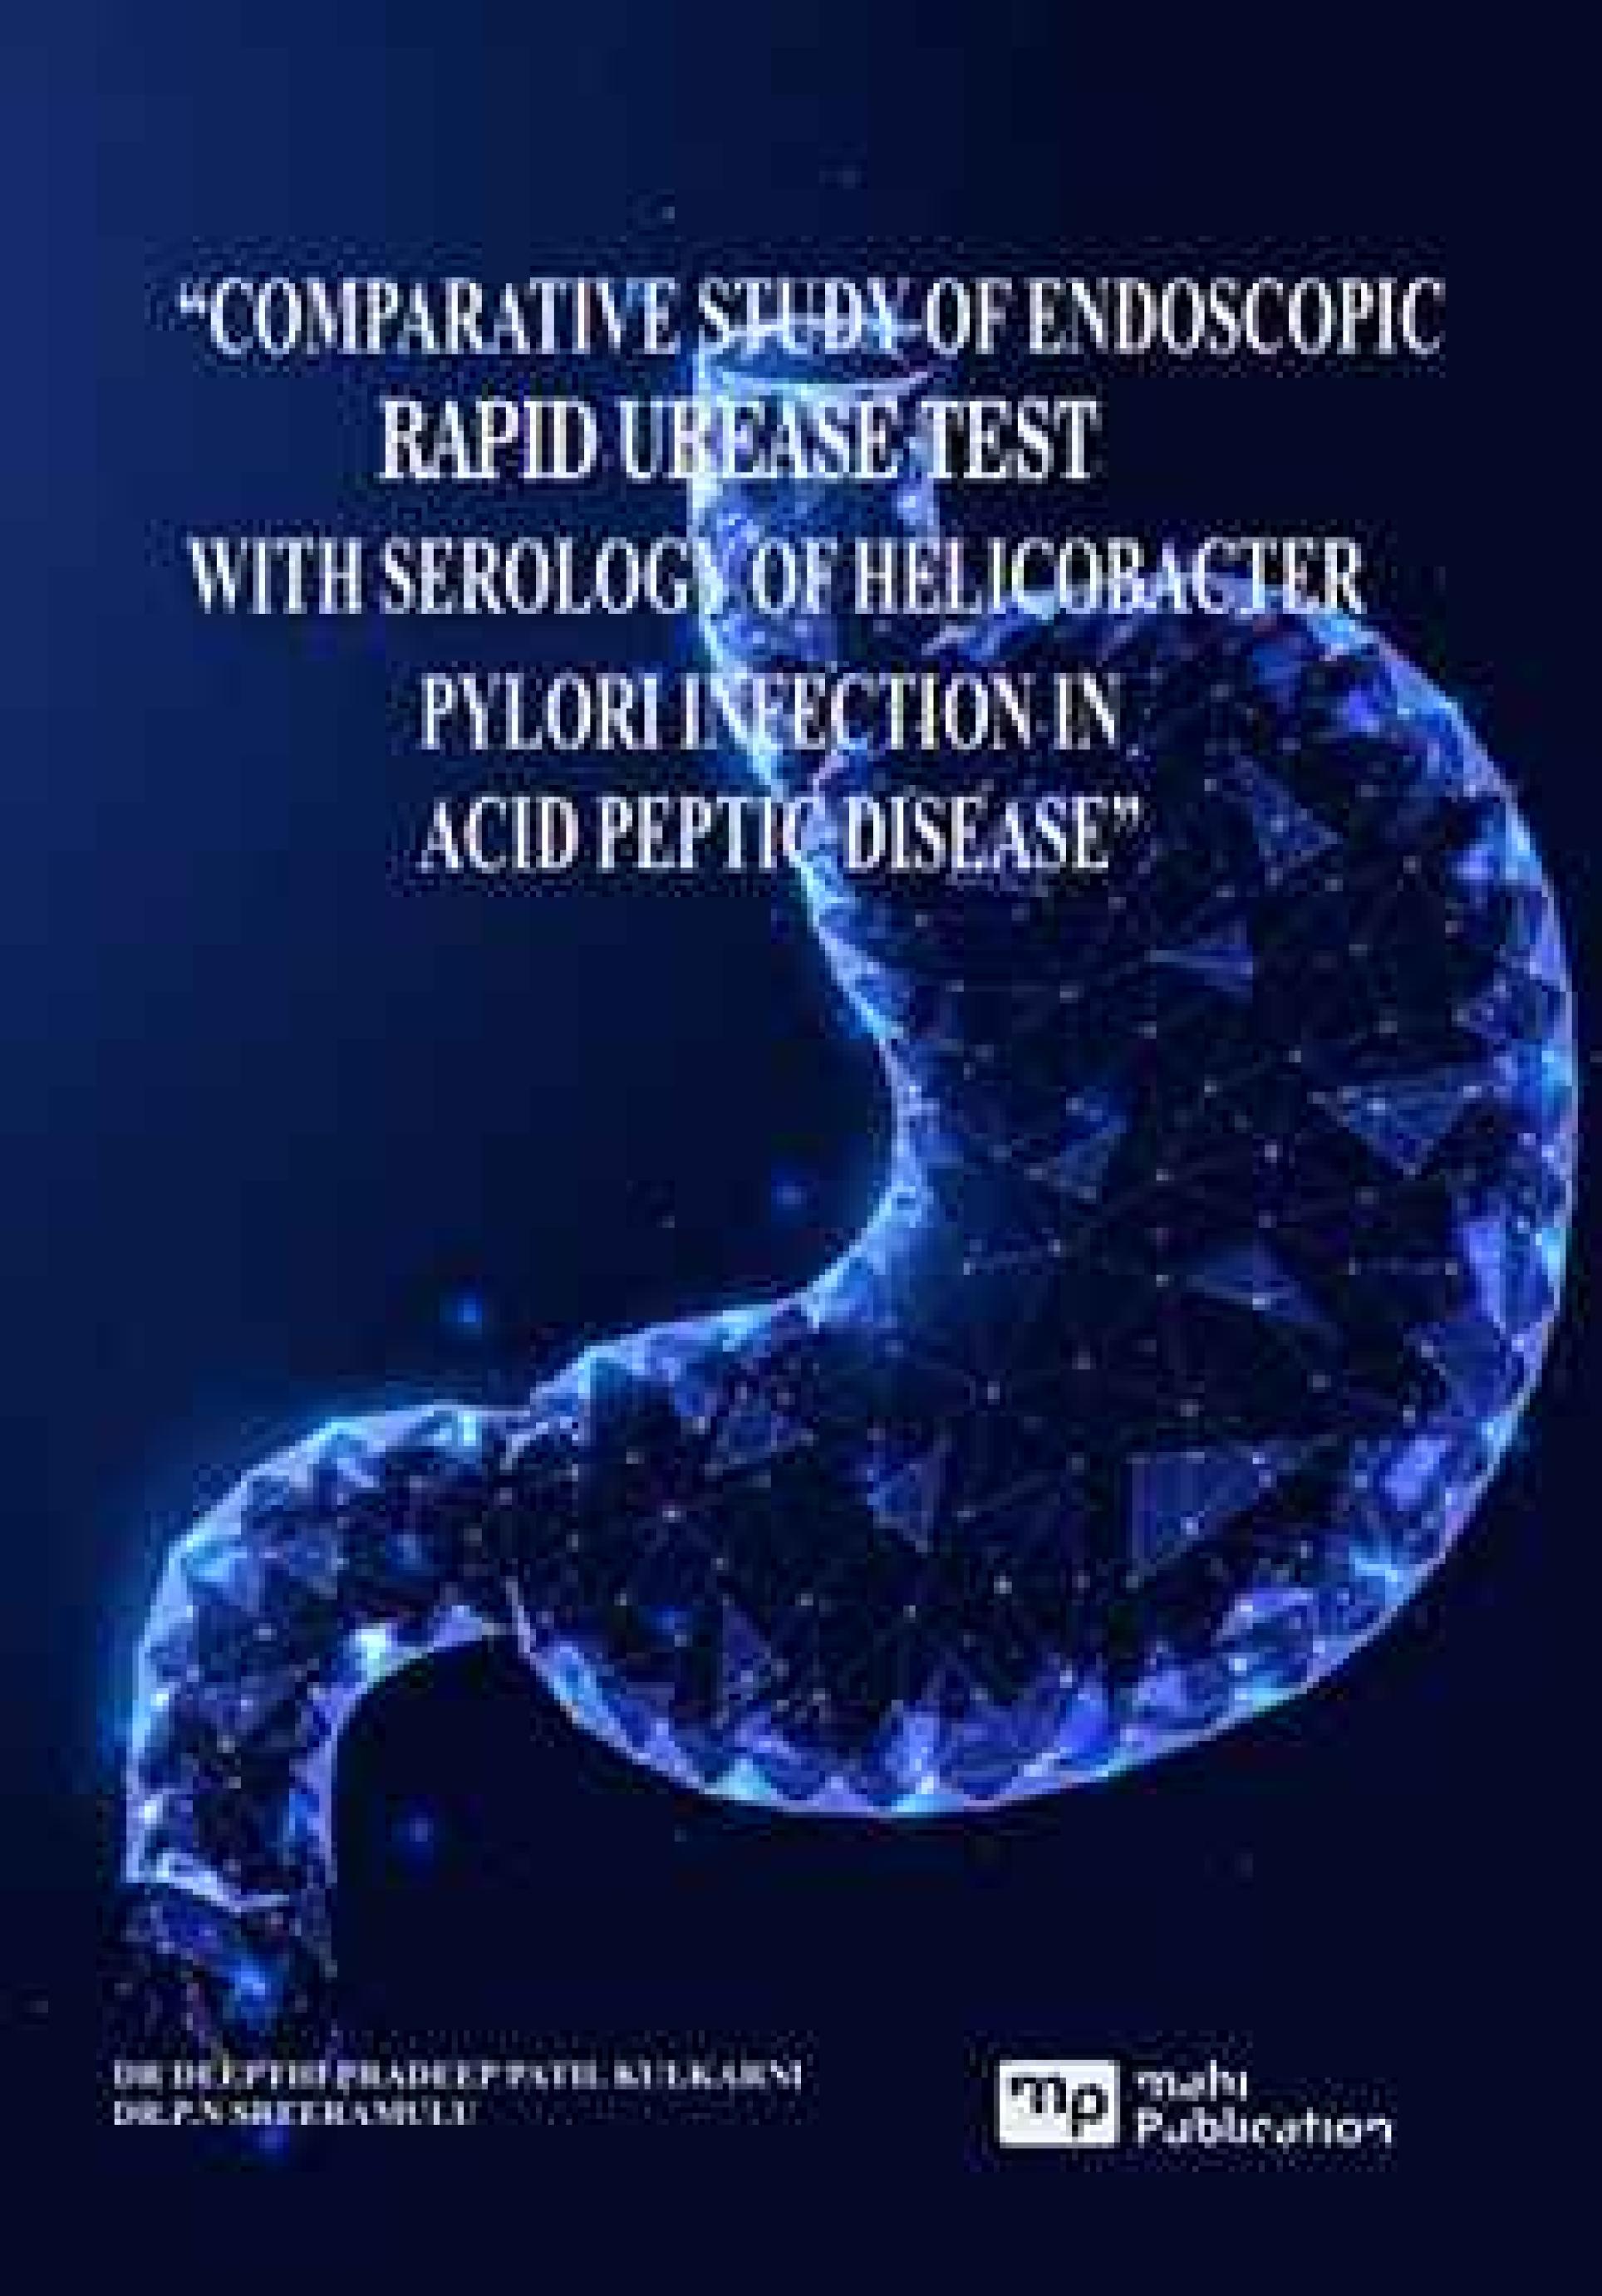 Comparative Study of Endoscopic Rapid Urease Test With Serology of Helicobacter Pylori Infection in Acid Peptic Disease